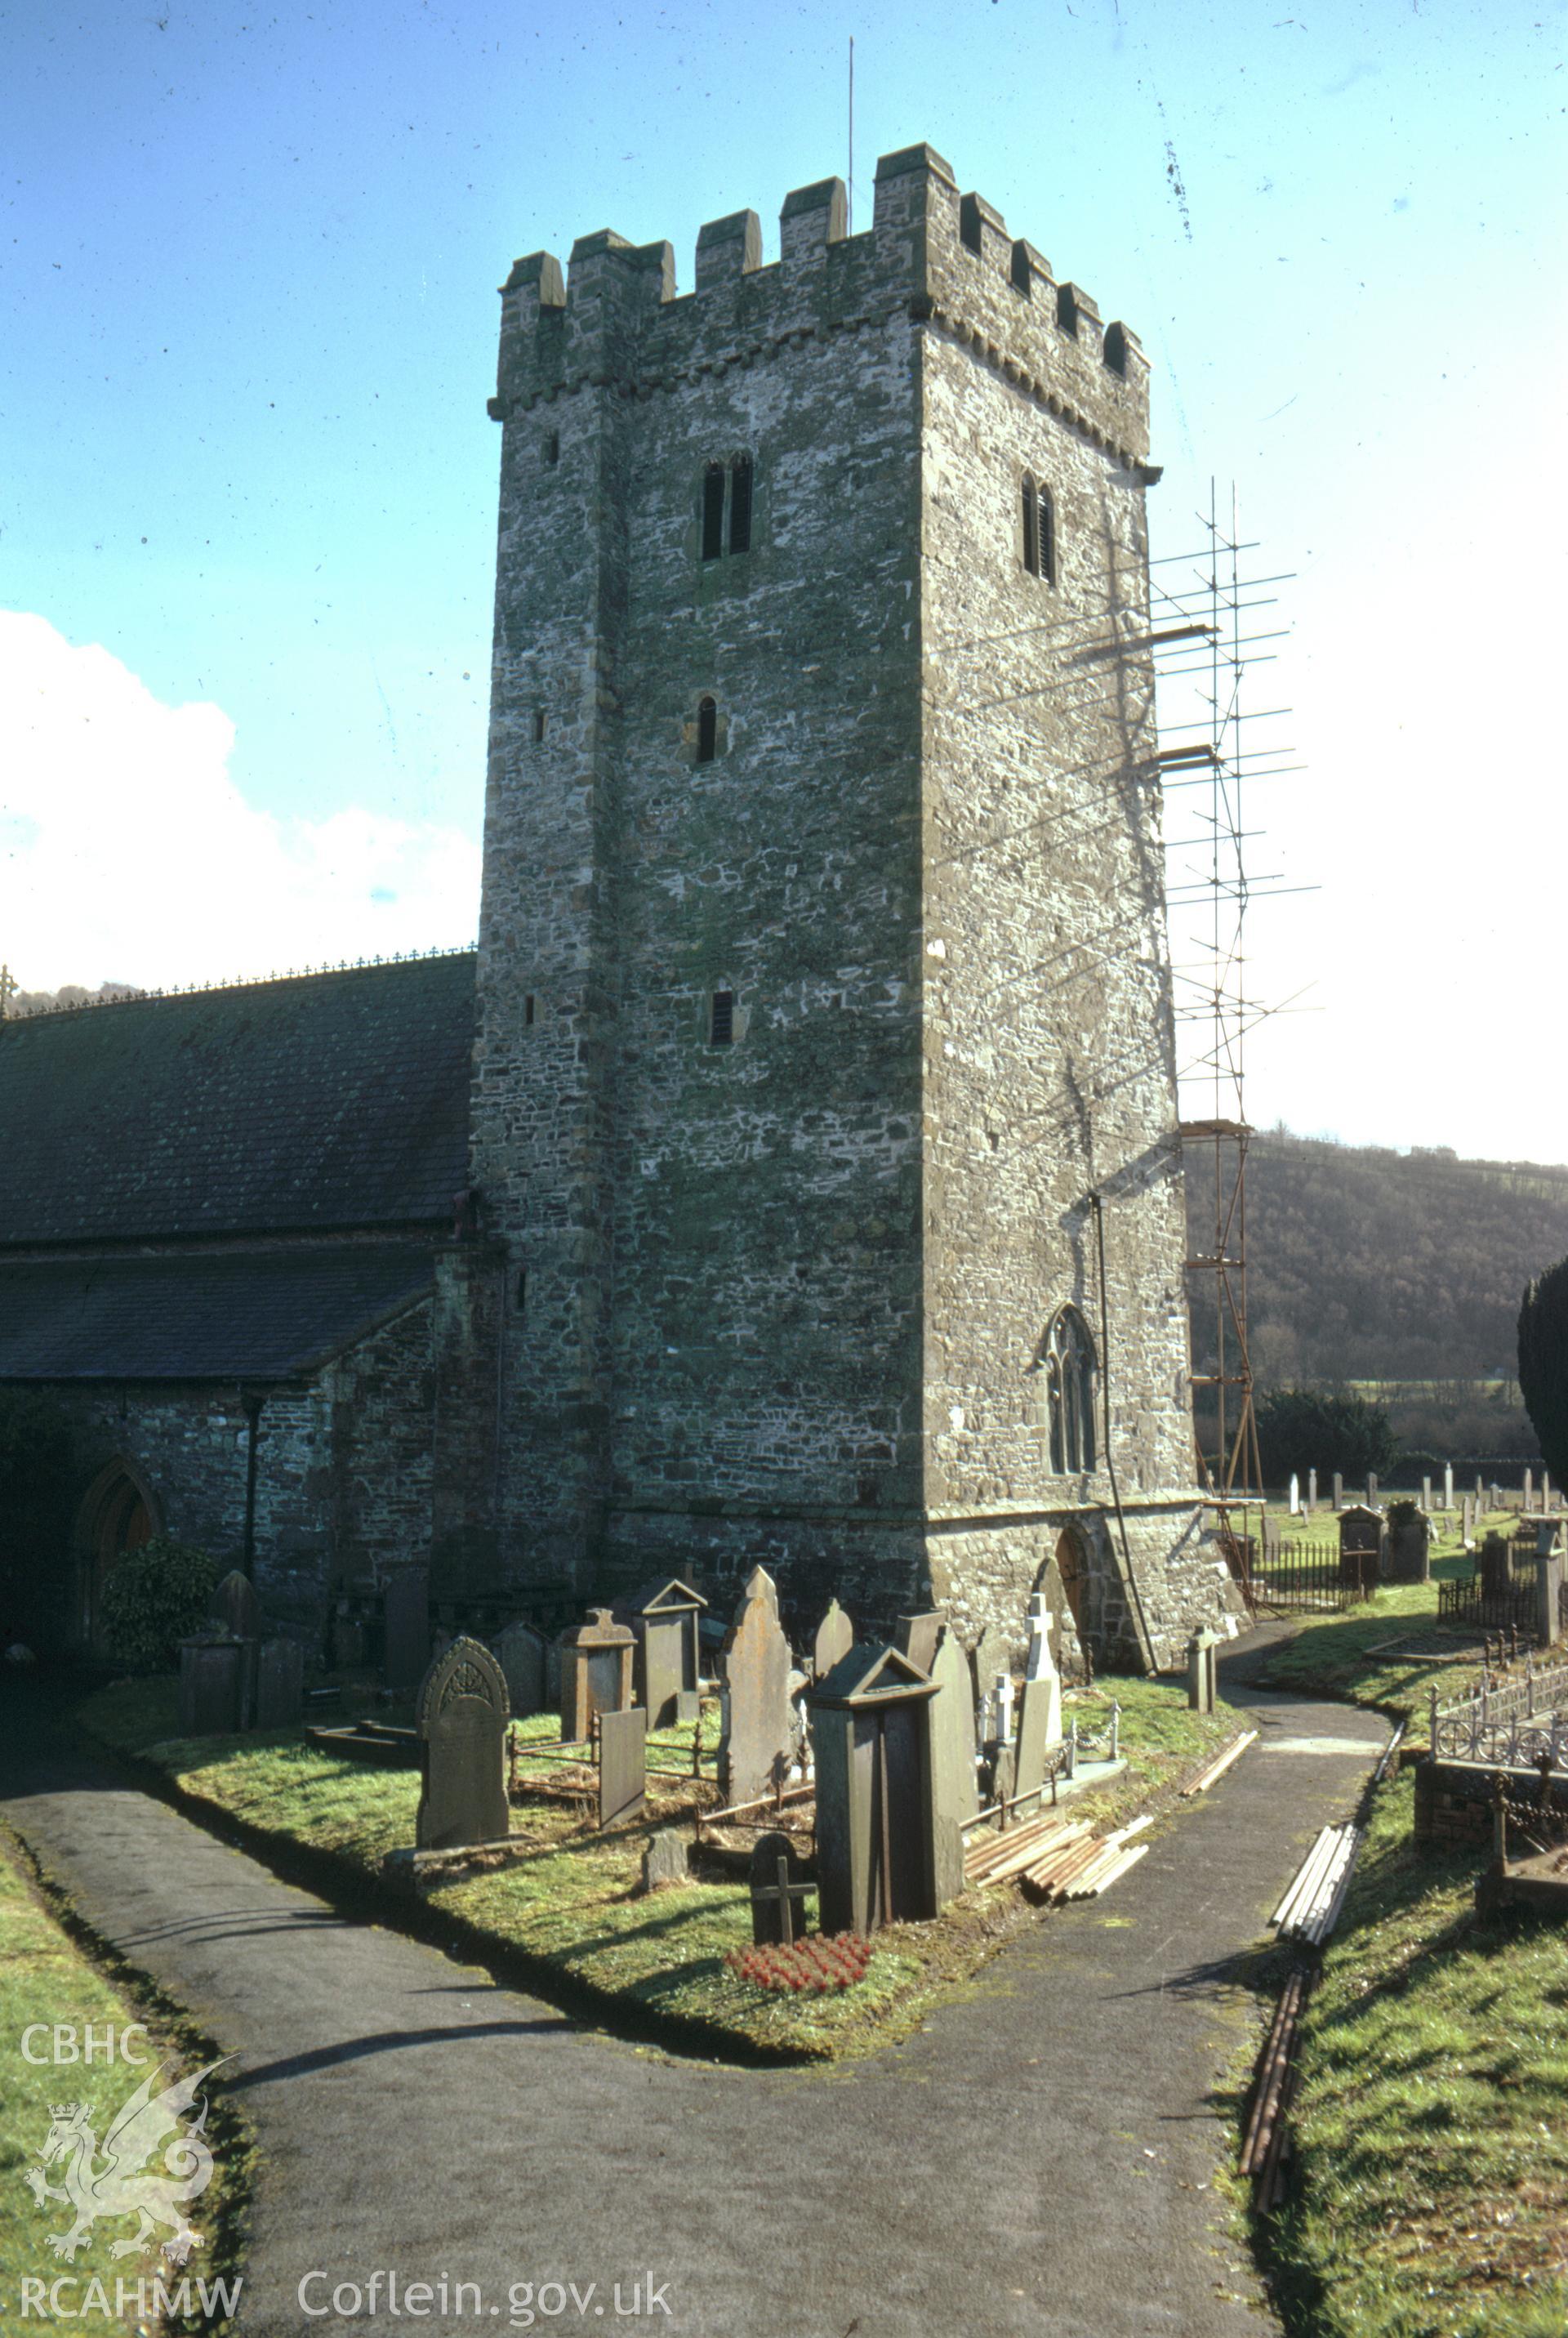 Colour slide showing exterior view of Llandysul Church from the north-west.